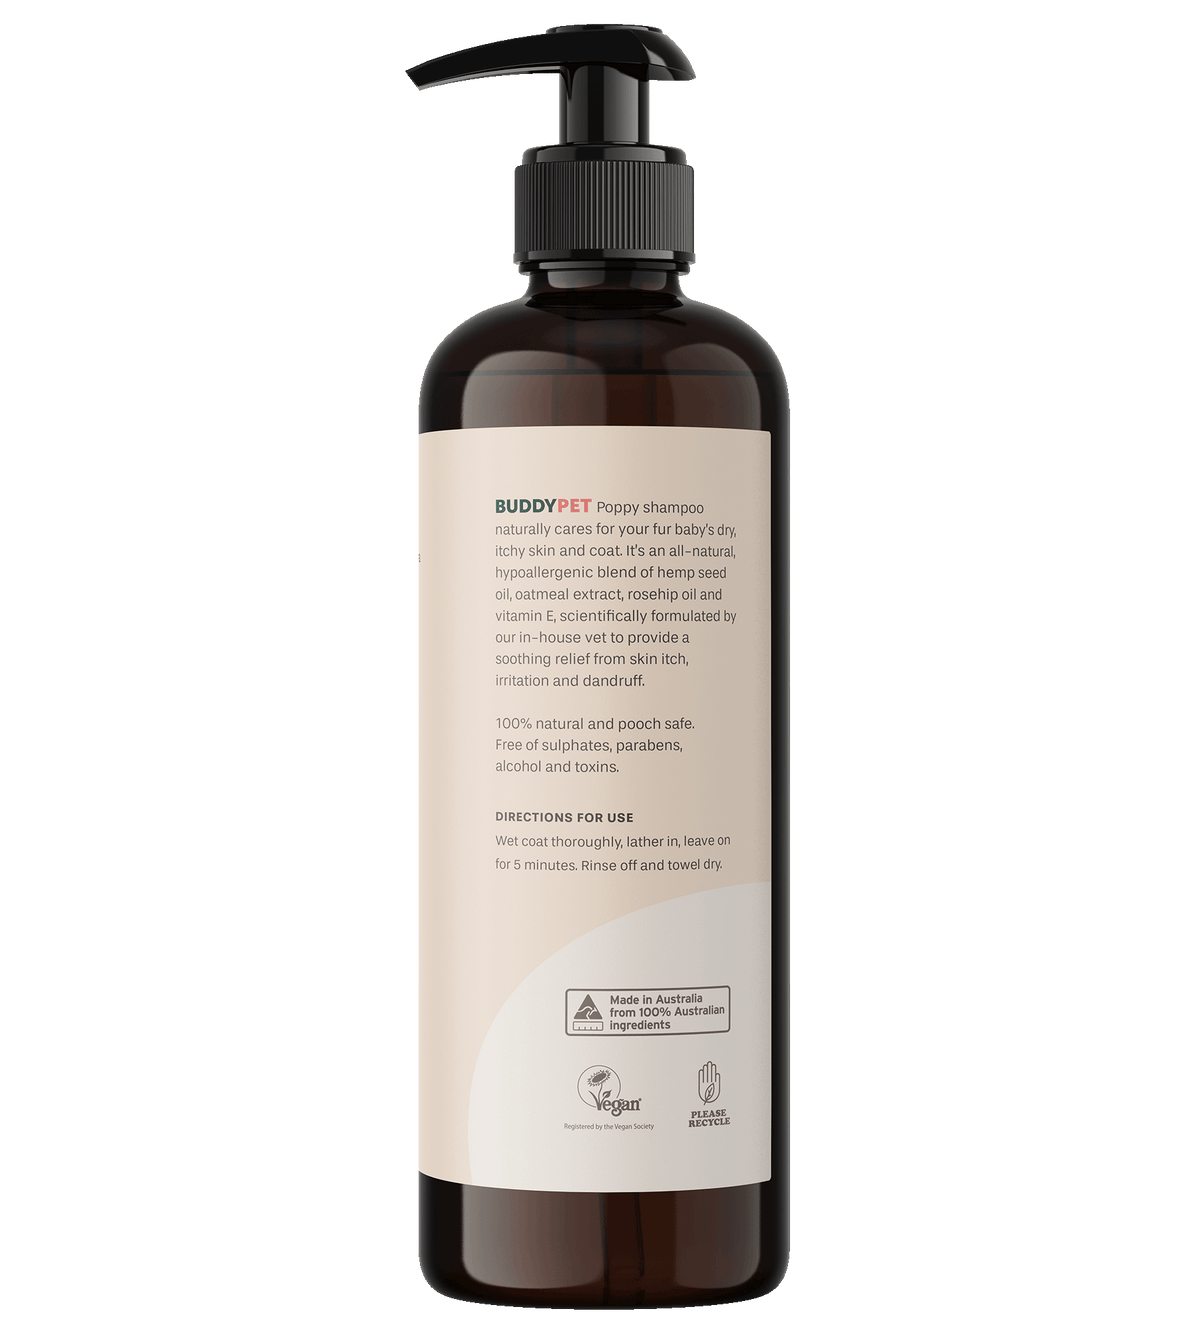 Hemp Dog Shampoo for Dry, Itchy Skin in a bottle with pump